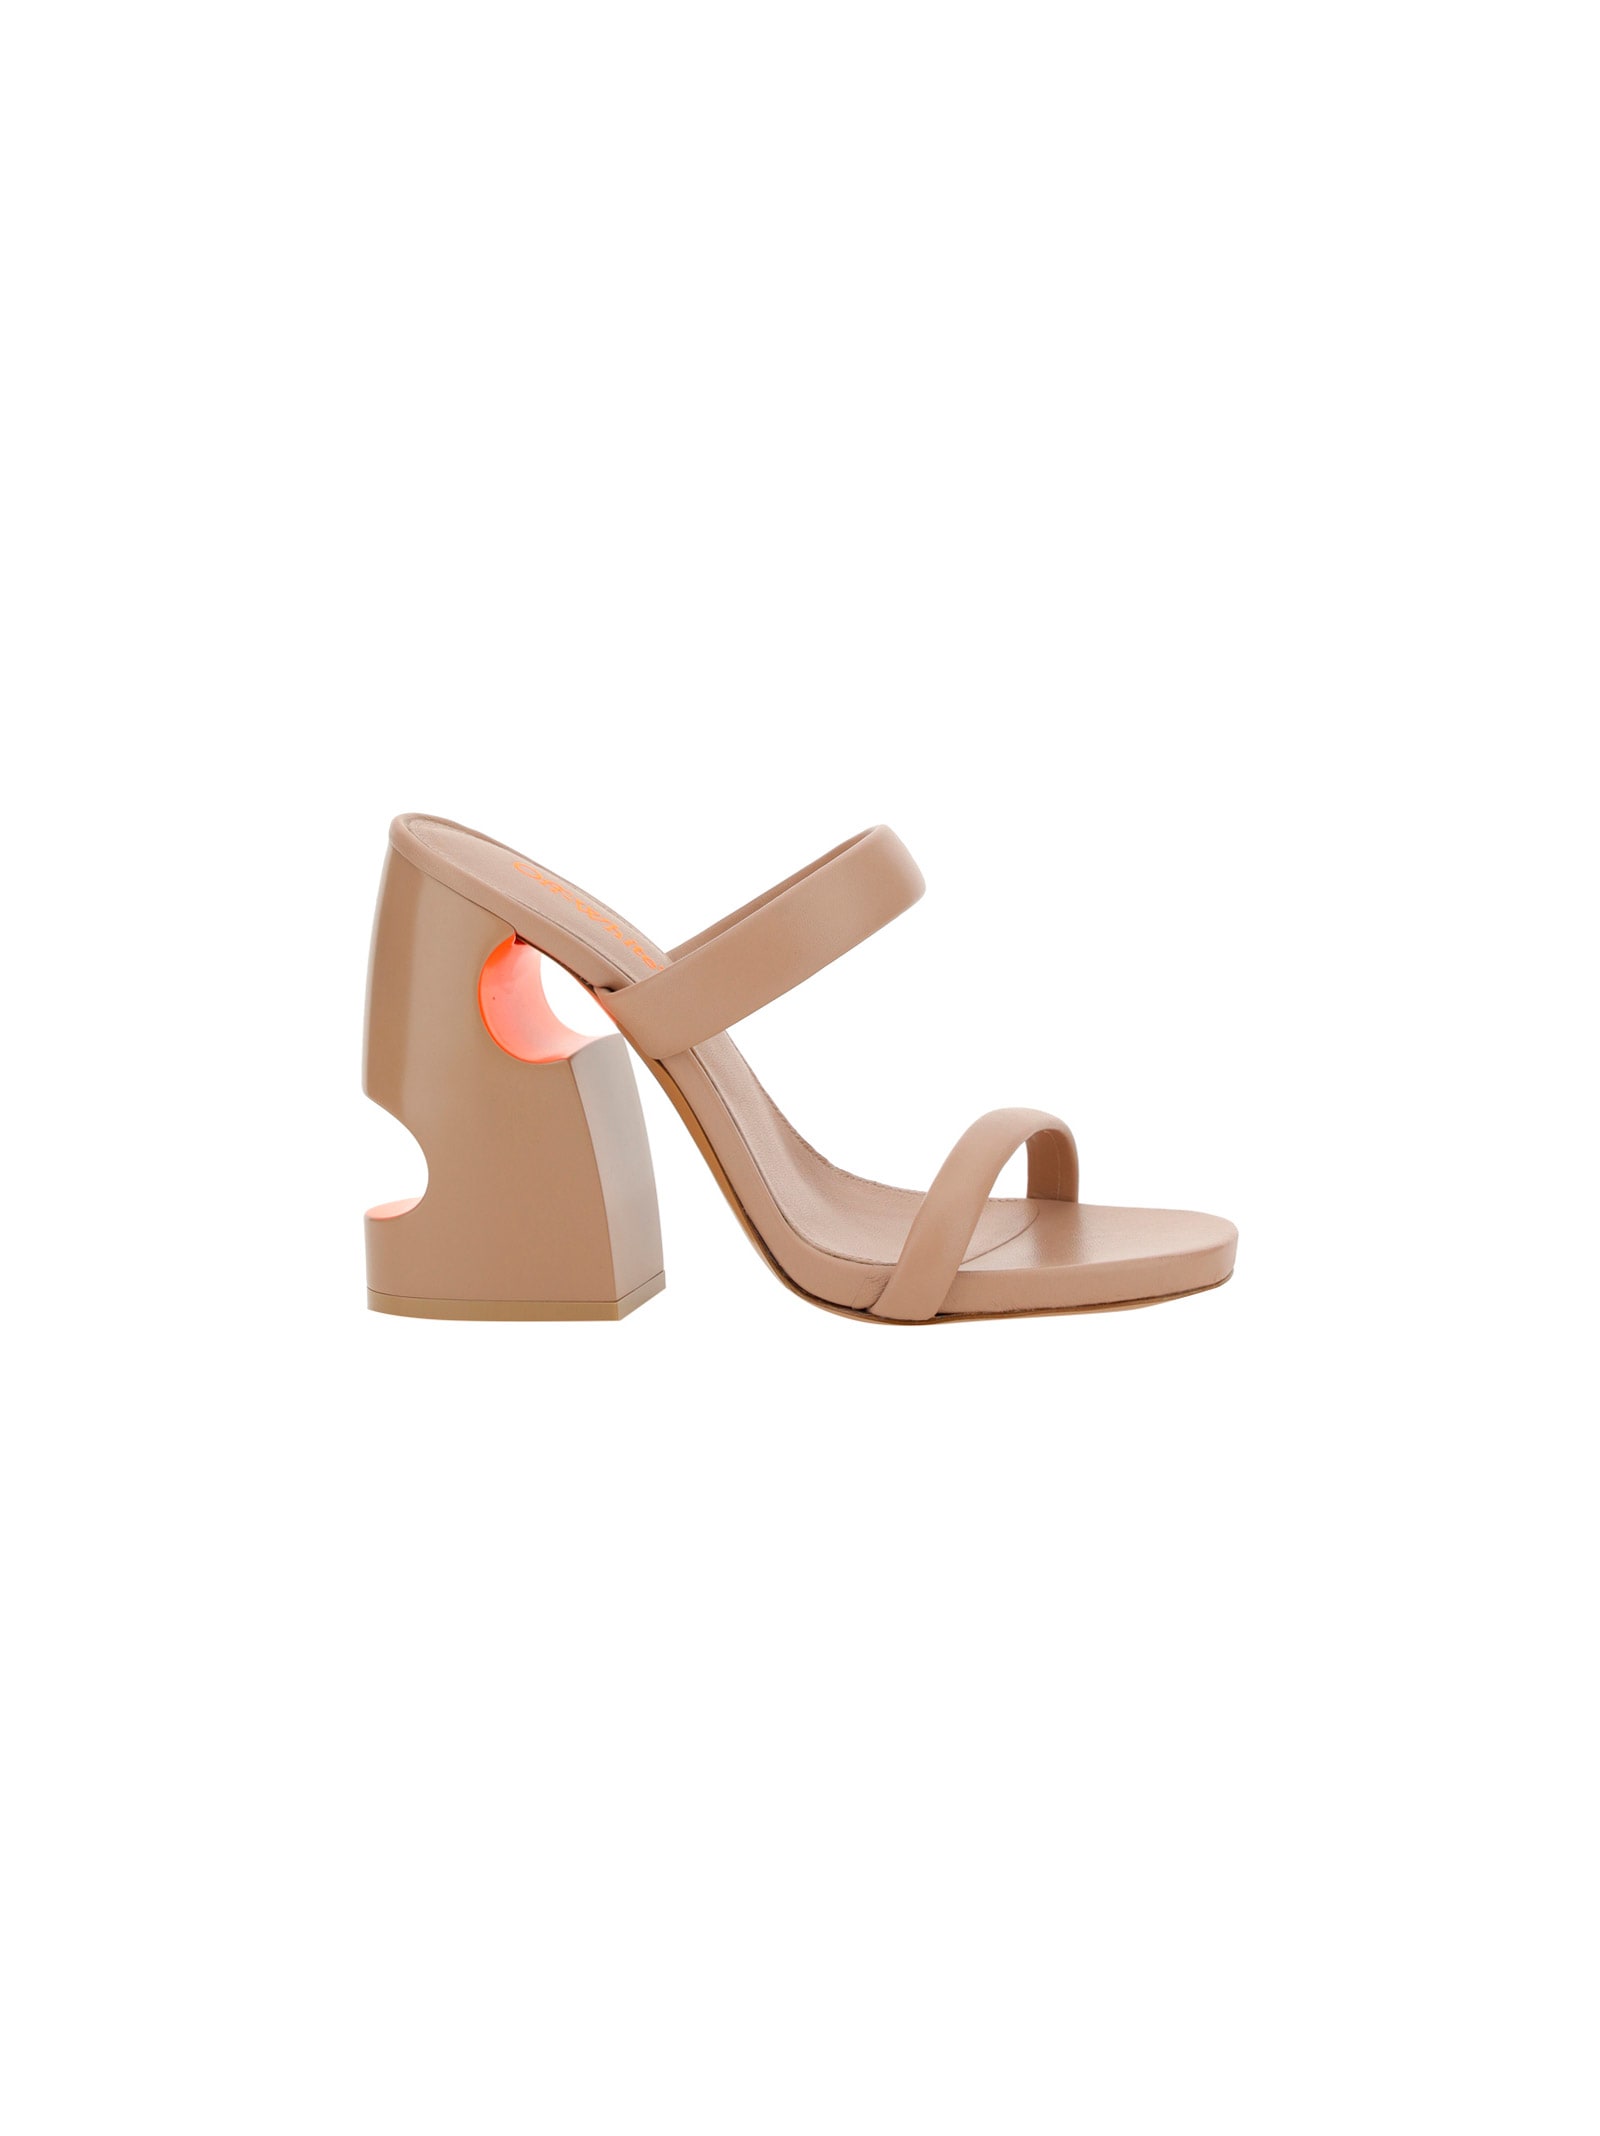 OFF-WHITE POP BULKY SANDALS